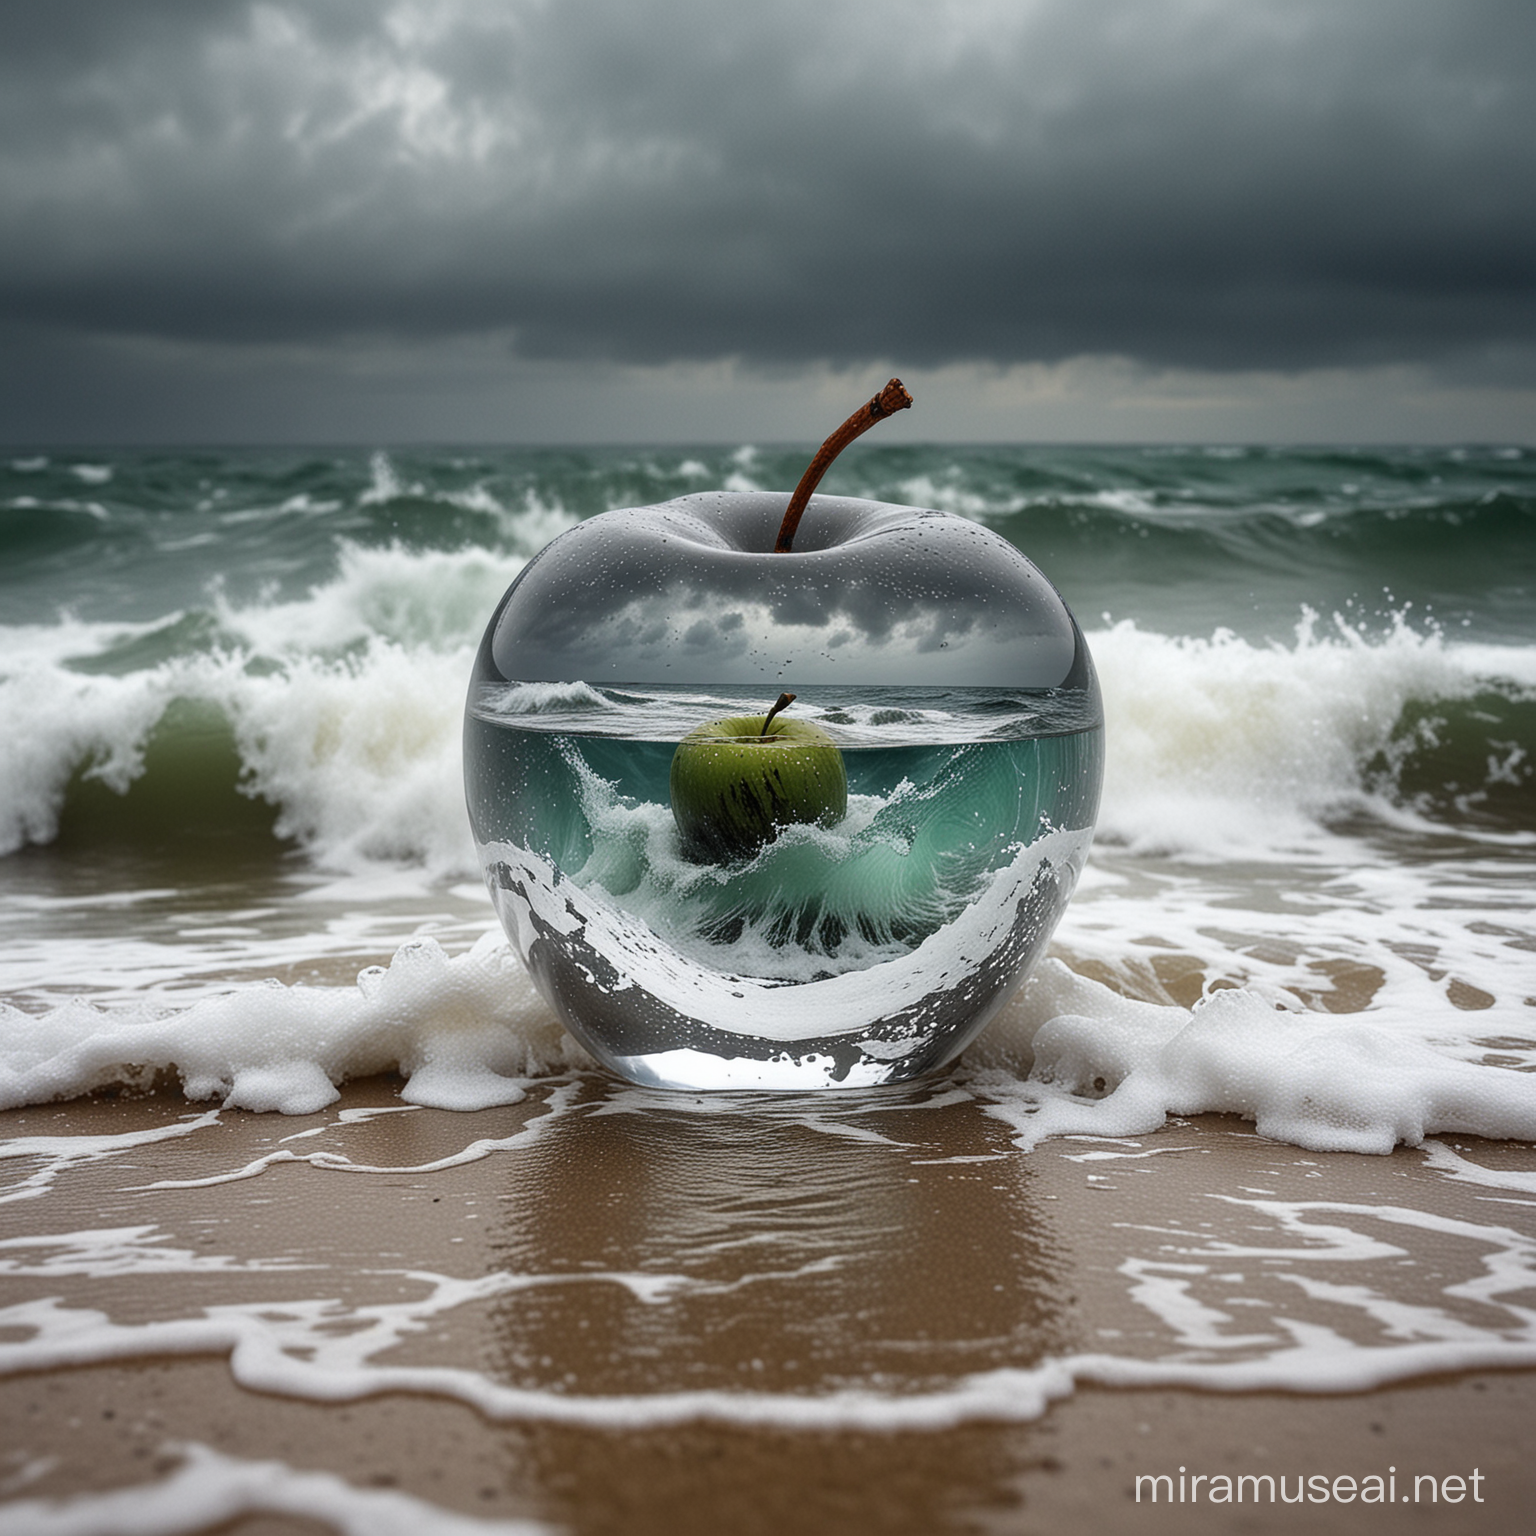 Imagine a photograph capturing an extraordinary and surreal subject: a transparent apple, crystal clear and perfectly formed, revealing a highly detailed, tumultuous miniature sea raging within. The apple sits boldly in the center of the frame, its smooth, glass-like surface reflecting light and offering a window into the dynamic scene inside. Within, the stormy sea is a marvel of miniaturization - tiny waves crest and crash with realistic ferocity, and if one looks closely, minute flashes of lightning and swirls of wind can be discerned, adding to the tempest's drama. The background of the photo is intentionally simple, perhaps a soft, neutral color or a subtle gradient, ensuring that all attention is drawn to the striking contrast between the serene exterior of the apple and the wild, chaotic seascape it contains. The lighting is key, illuminating the apple in a way that highlights the intricate details of the storm inside while maintaining the overall clarity and impact of the image.